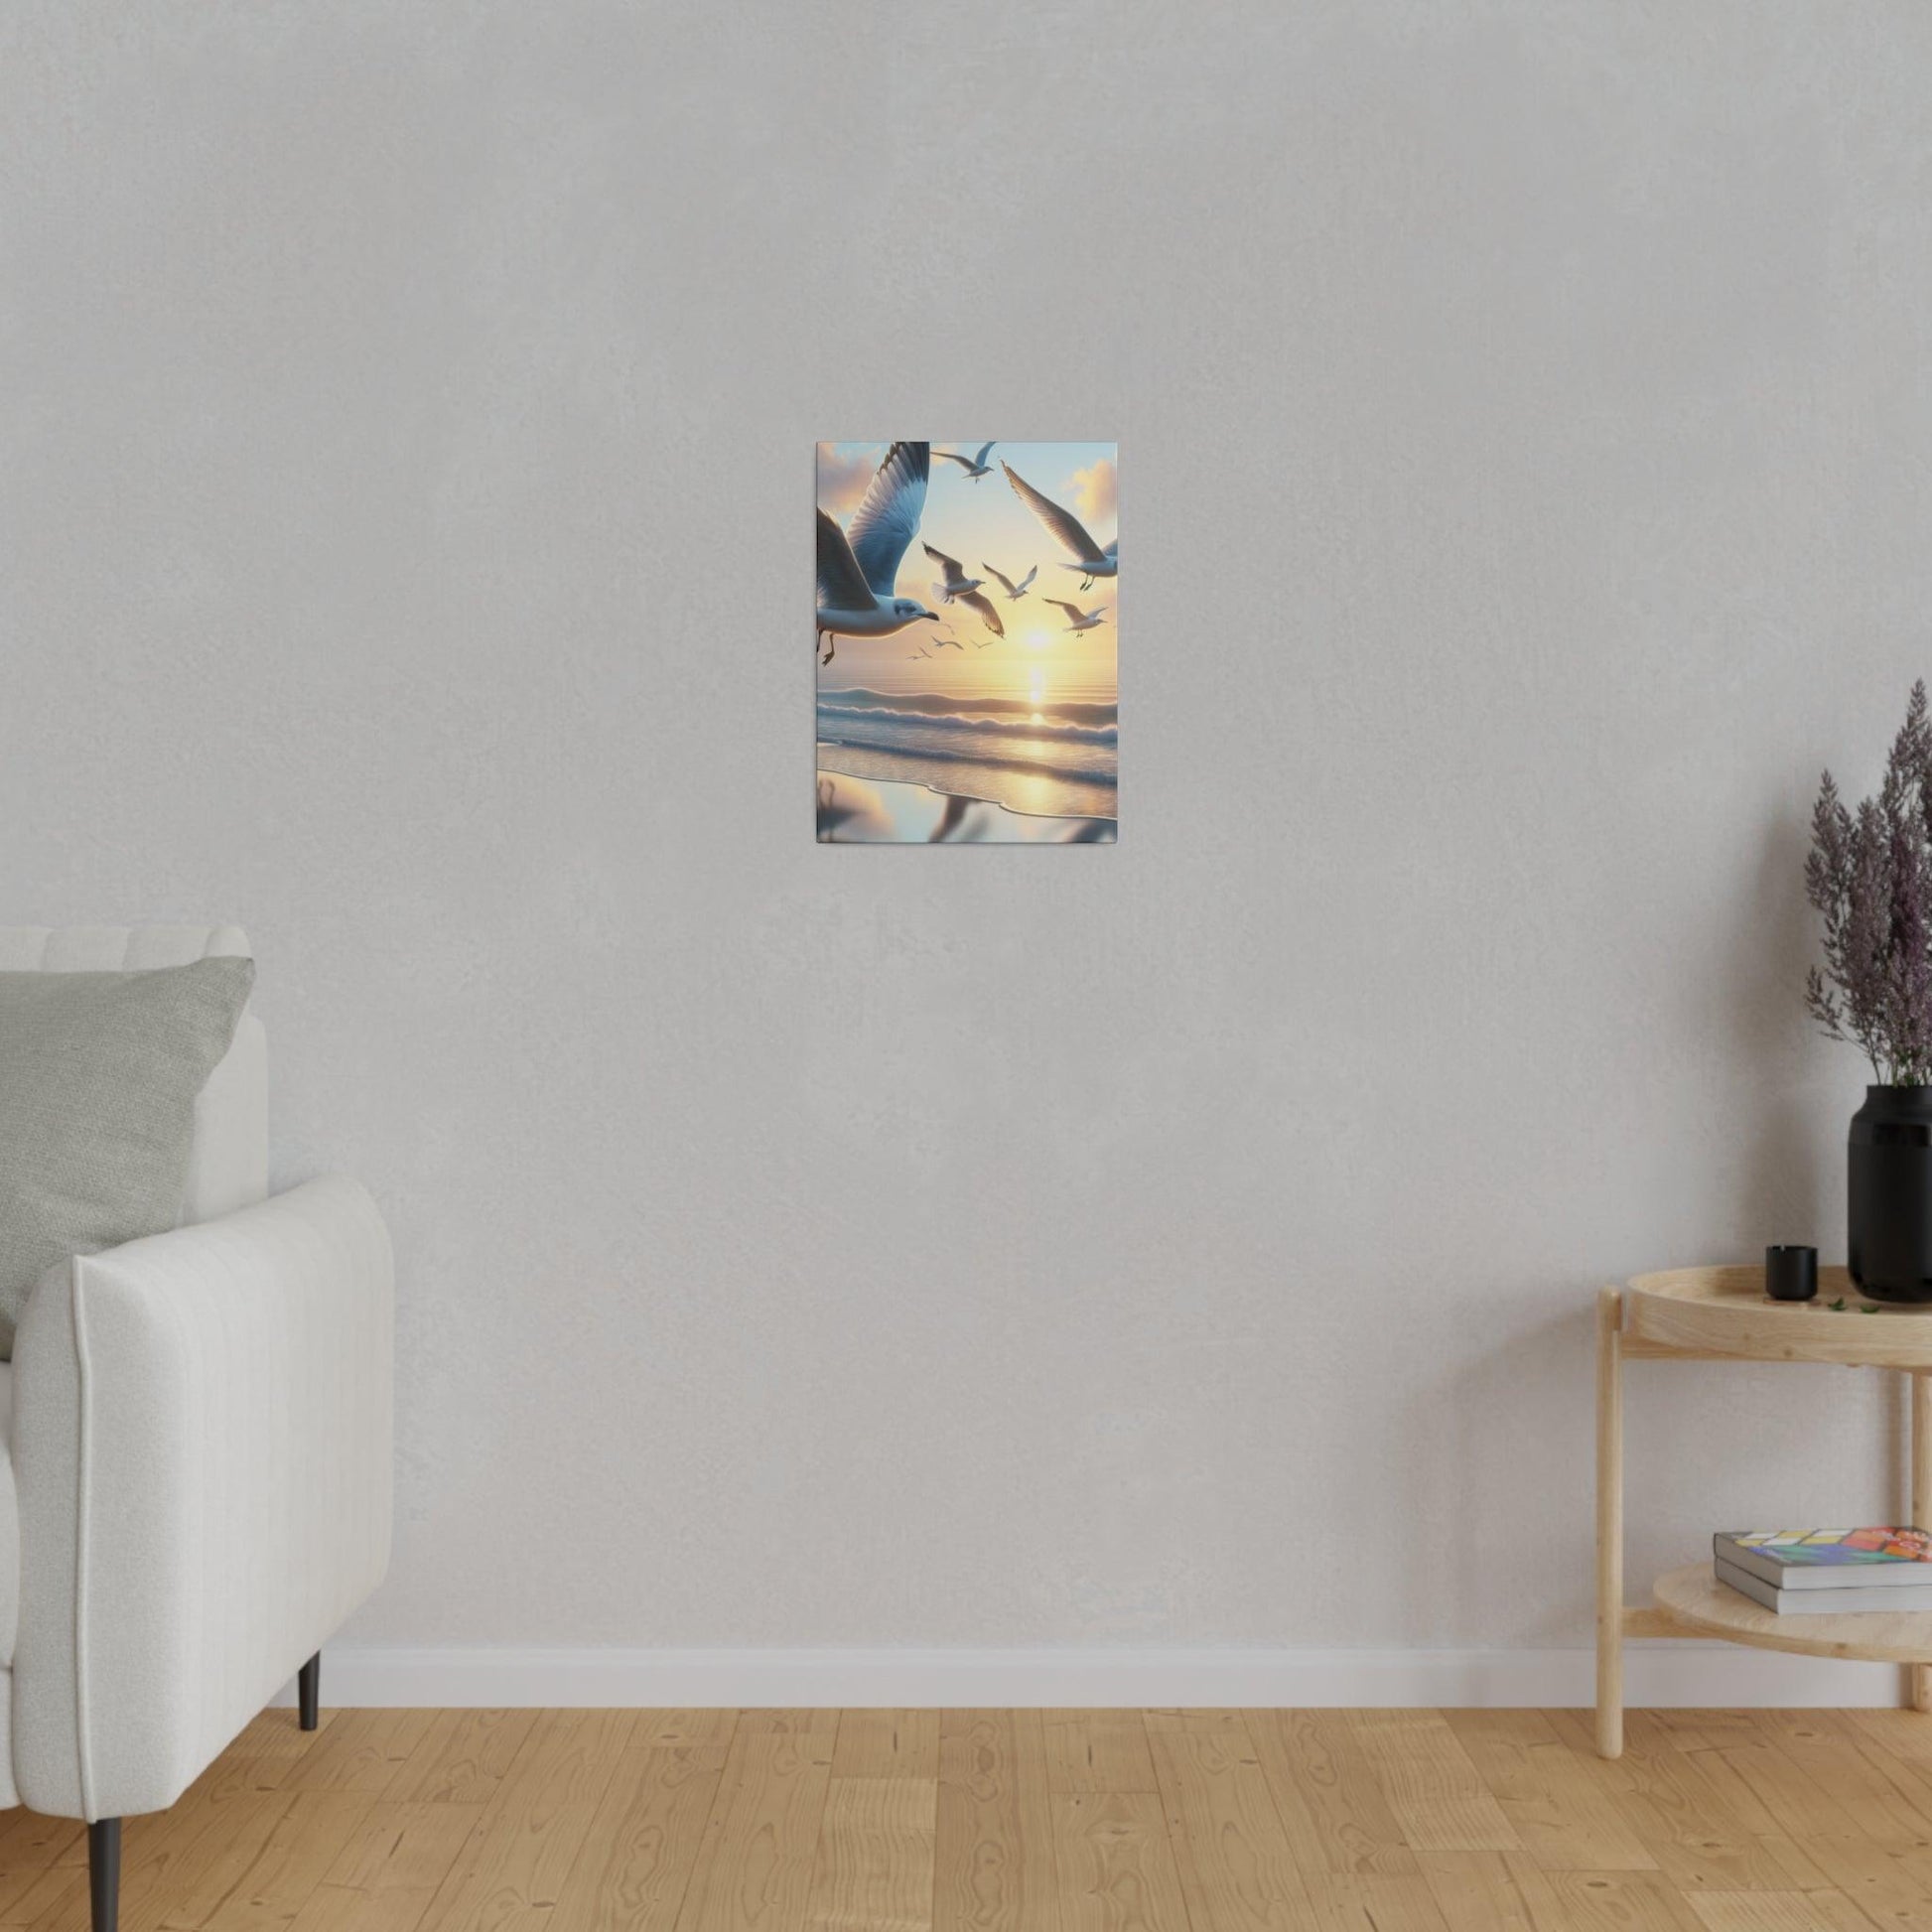 "Seagull Serenity: Waterfront Canvas Wall Art" - The Alice Gallery